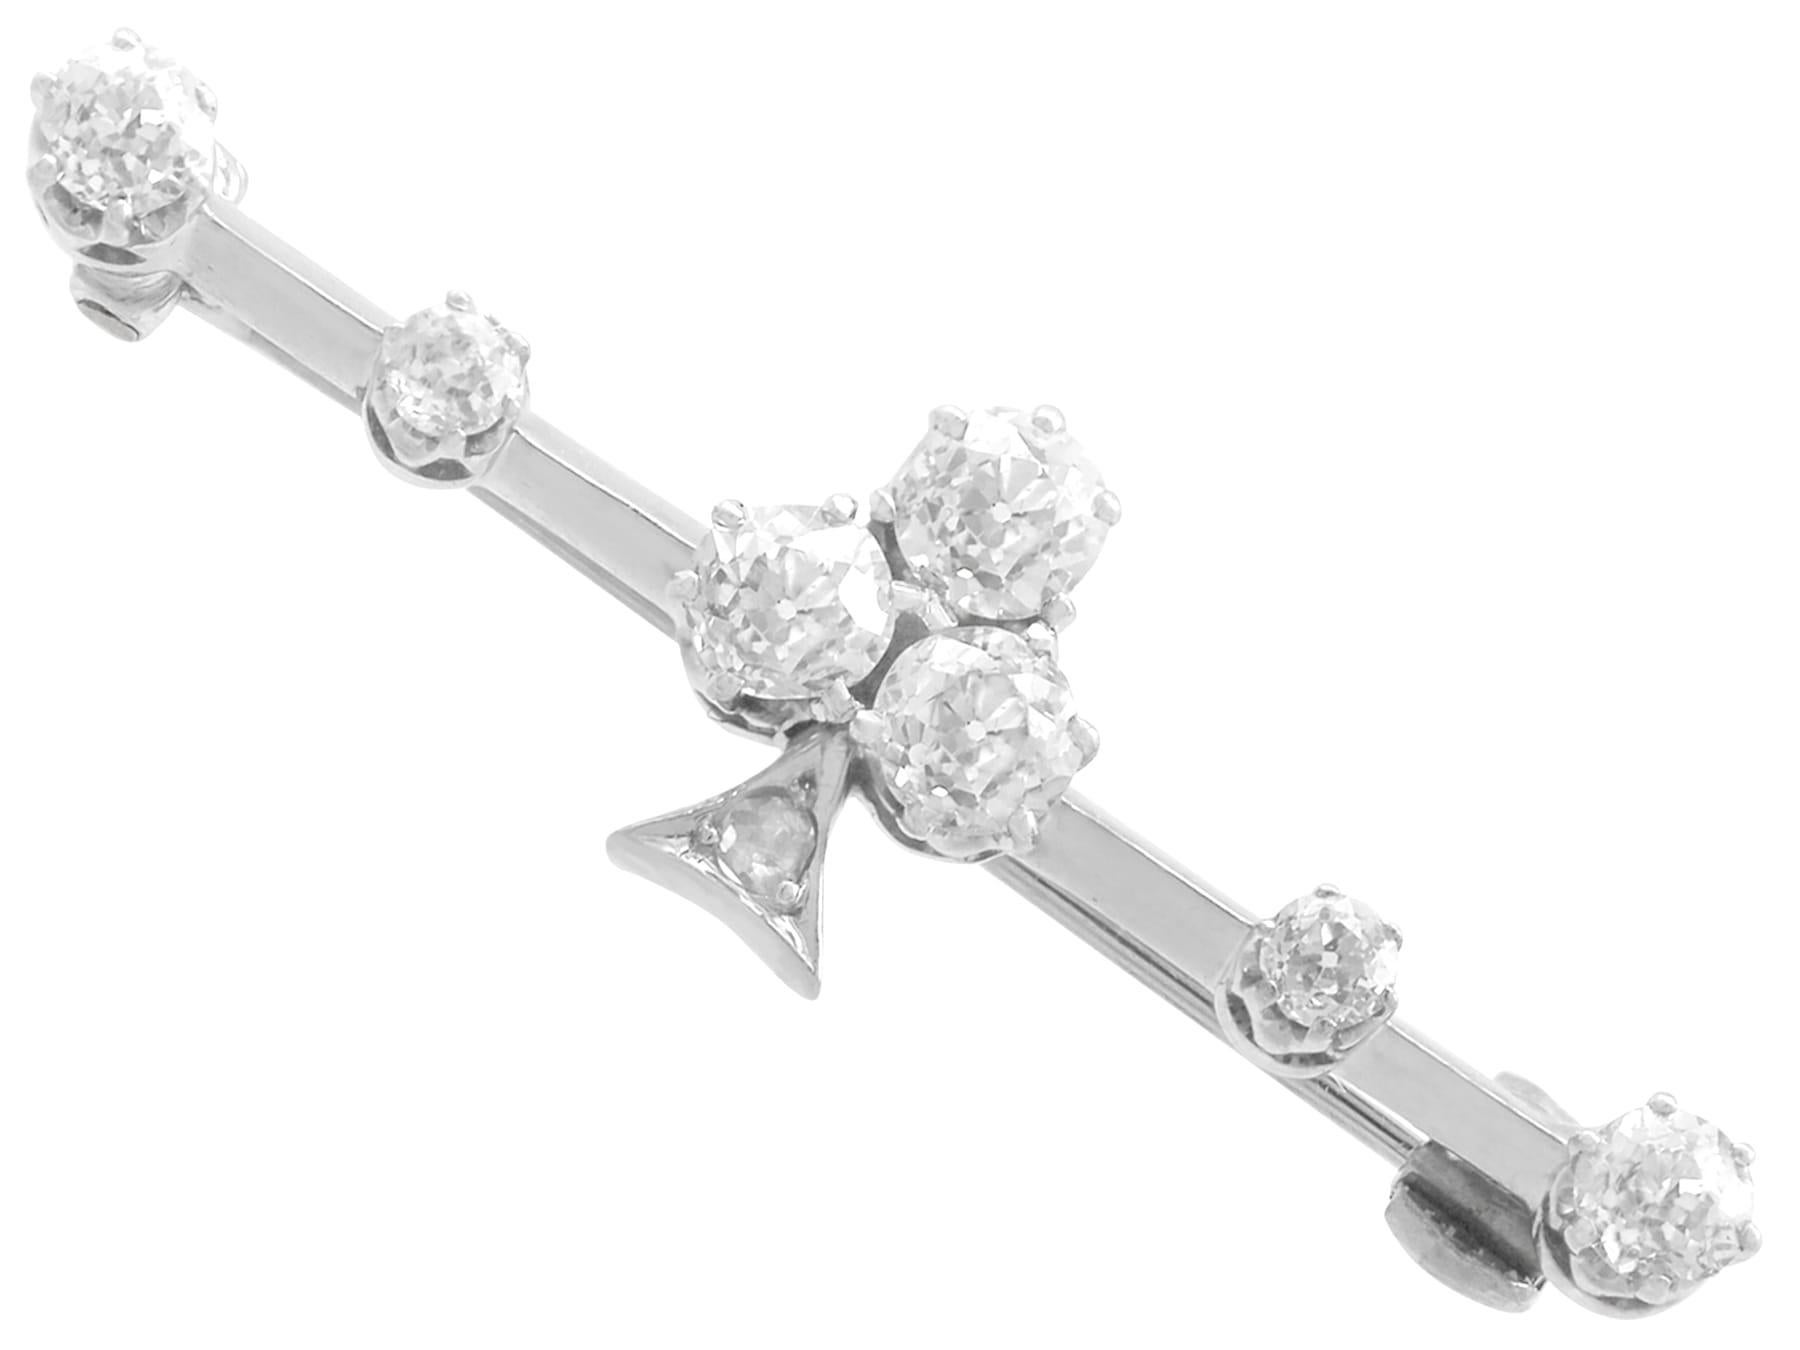 A fine and impressive antique 0.85 carat diamond and 14k white gold bar style brooch; part of our diverse antique diamond jewelry collections

This fine and impressive antique diamond bar brooch has been crafted in 14k white gold.

The brooch is